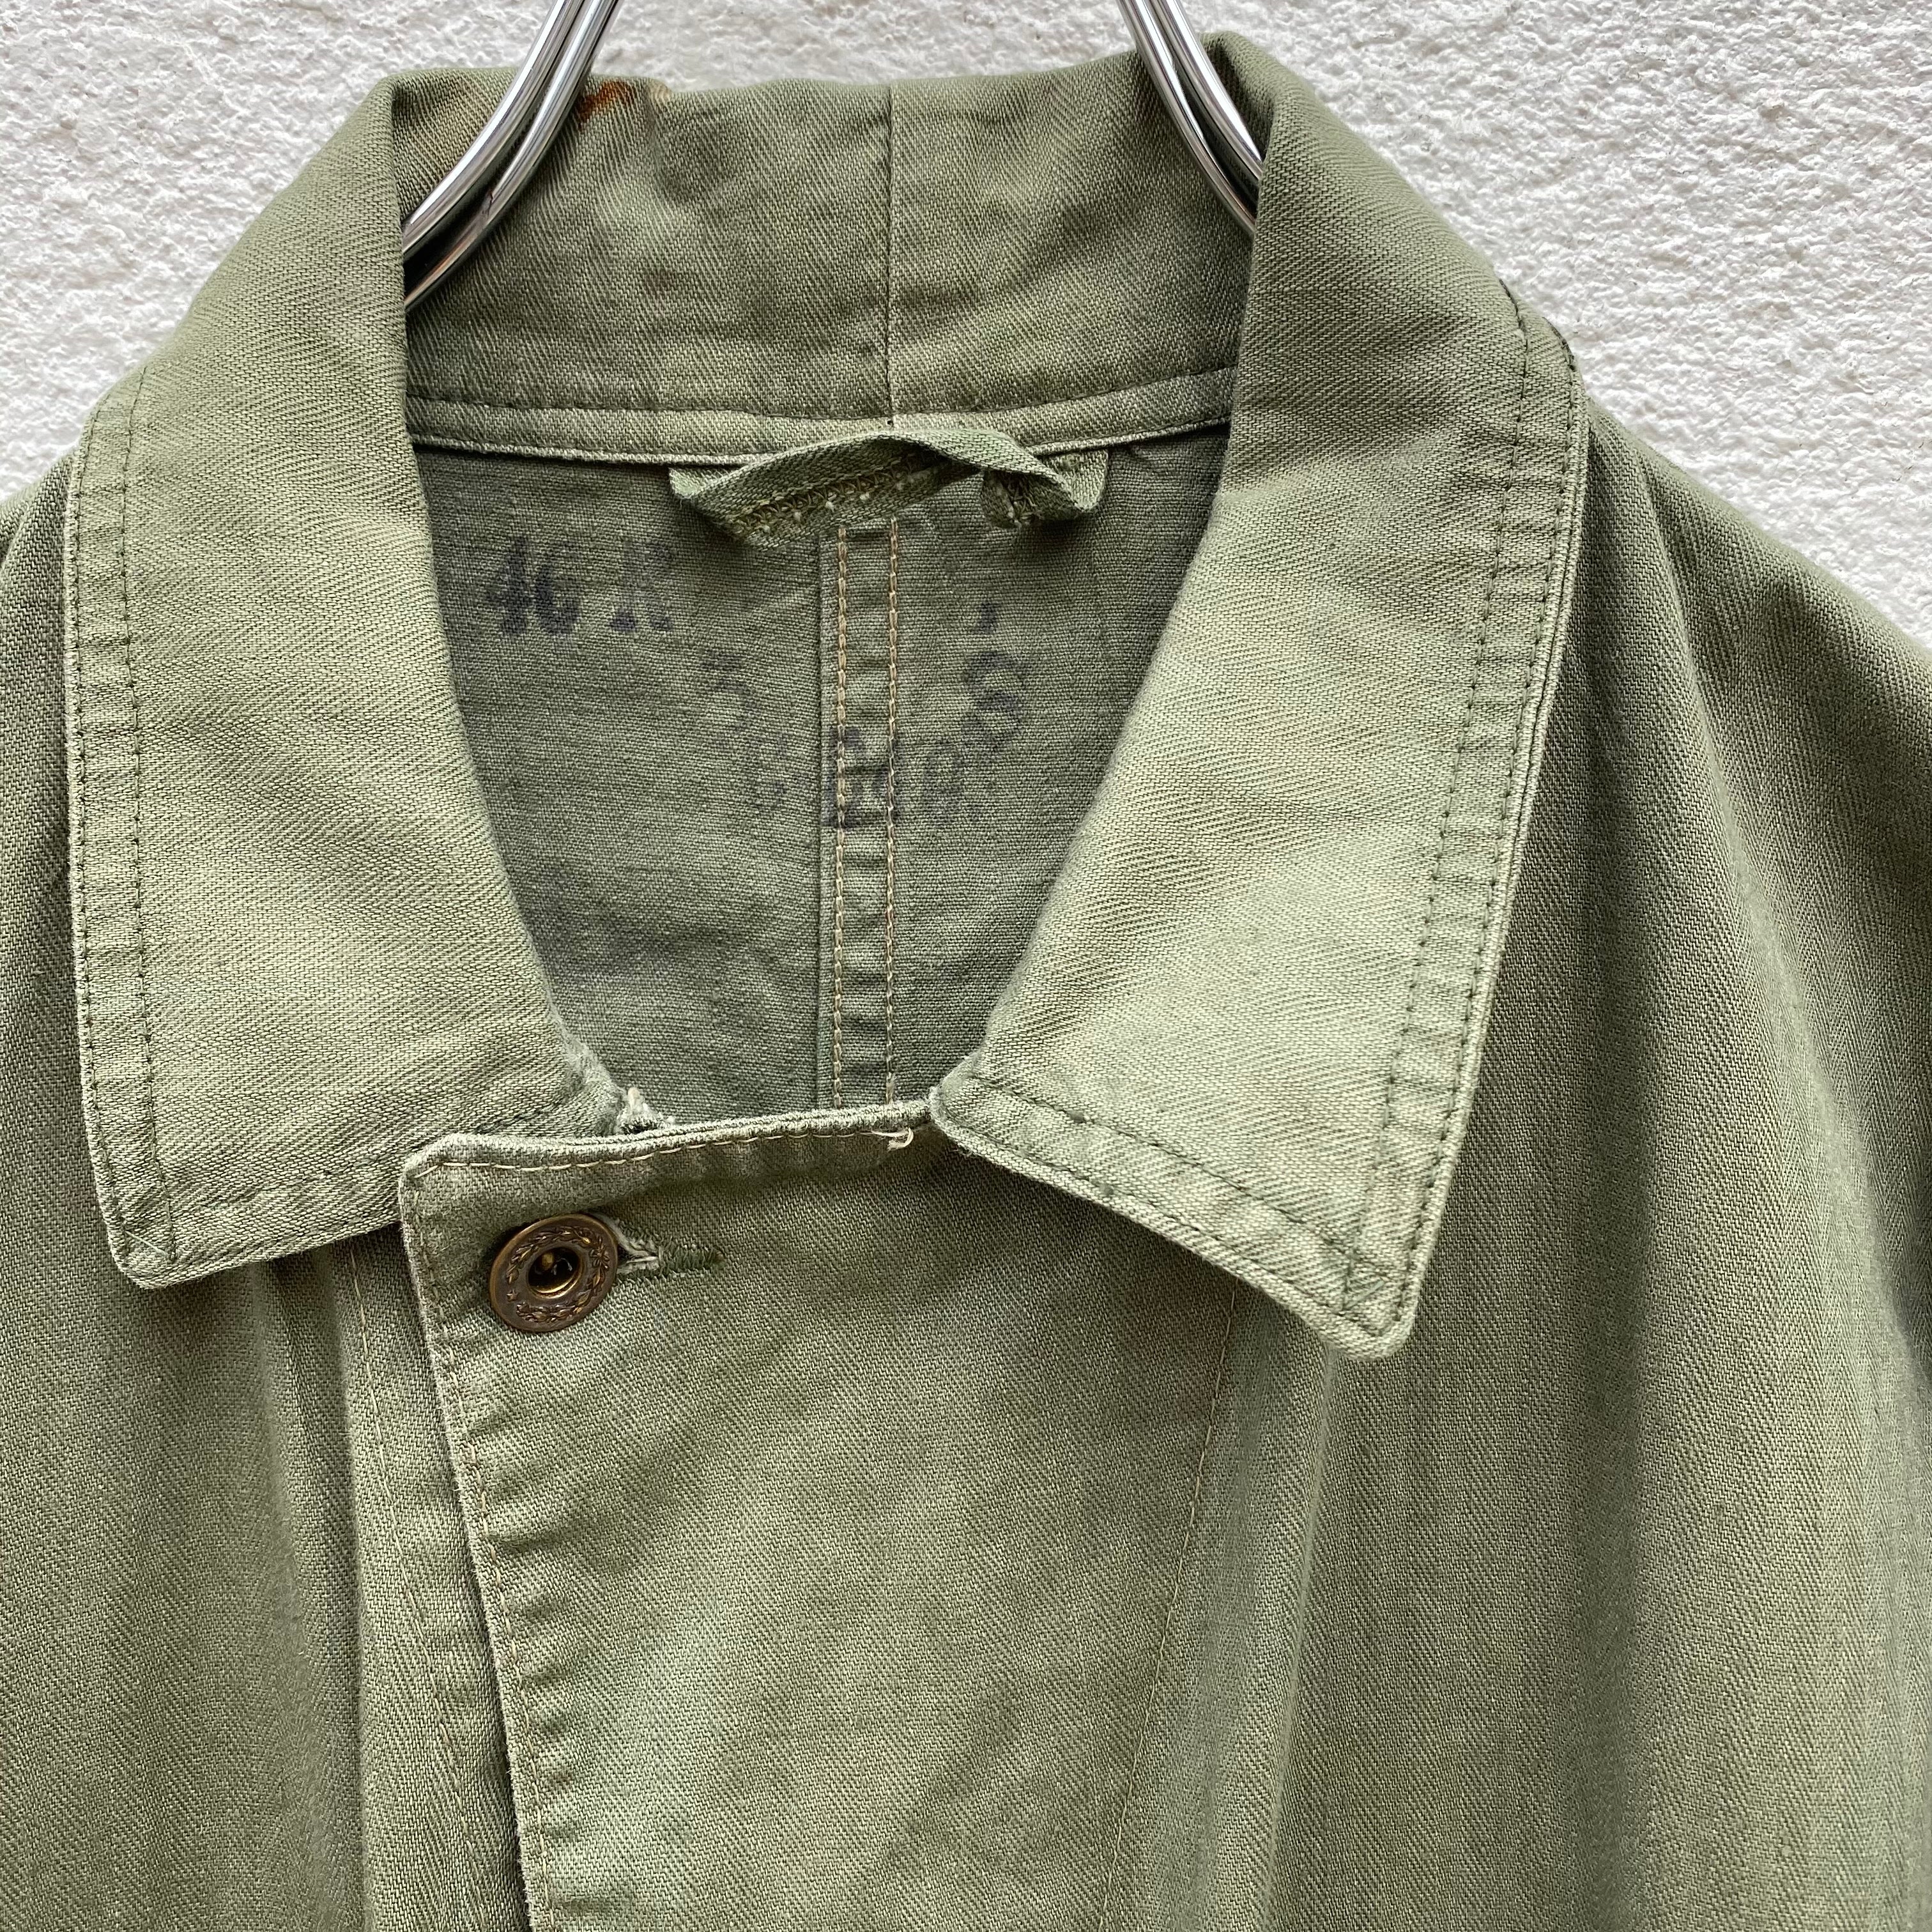 [ ONLY ONE ! ] US ARMED FORCES EARLY 40's COVERALLS / Mr.Clean Select